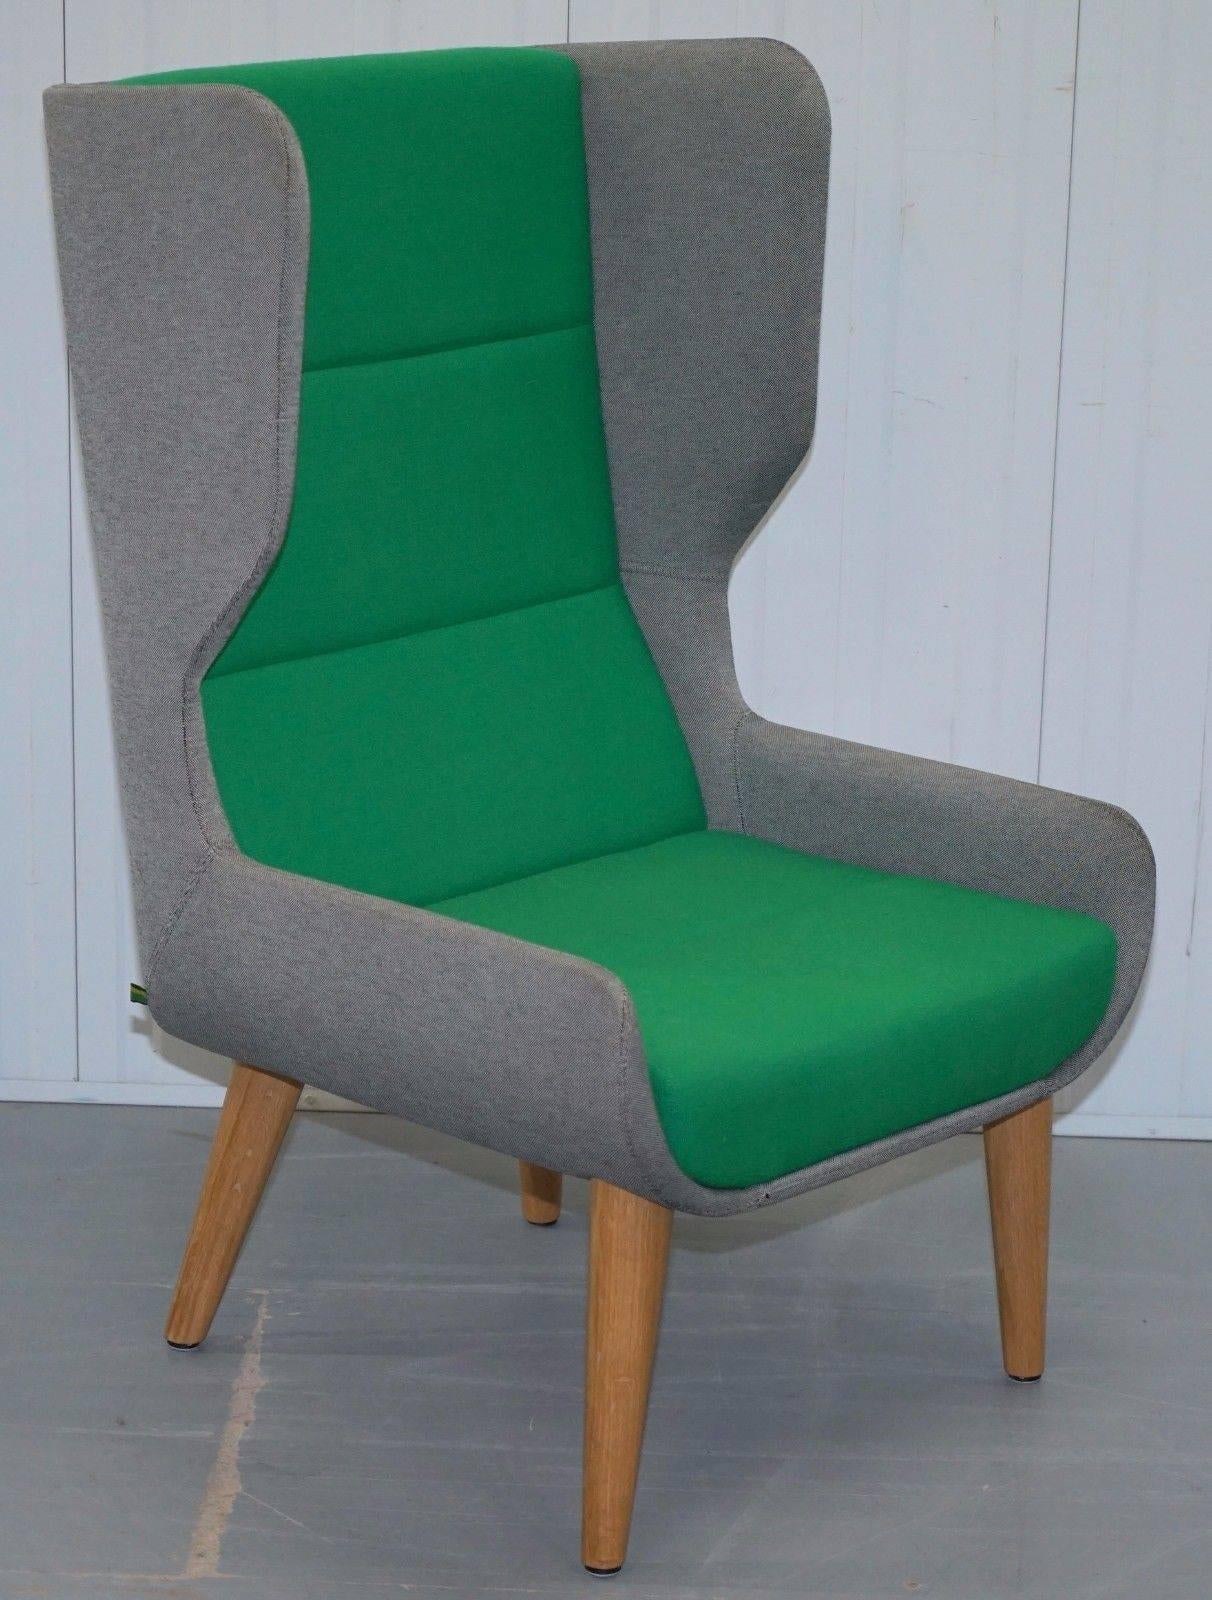 We are delighted to offer for sale this stunning pair of super contemporary NaughtOne Hush wingback armchairs RRP £3400

The condition is very good, the upholstery has been professionally cleaned and two of the legs have been repaired, otherwise,